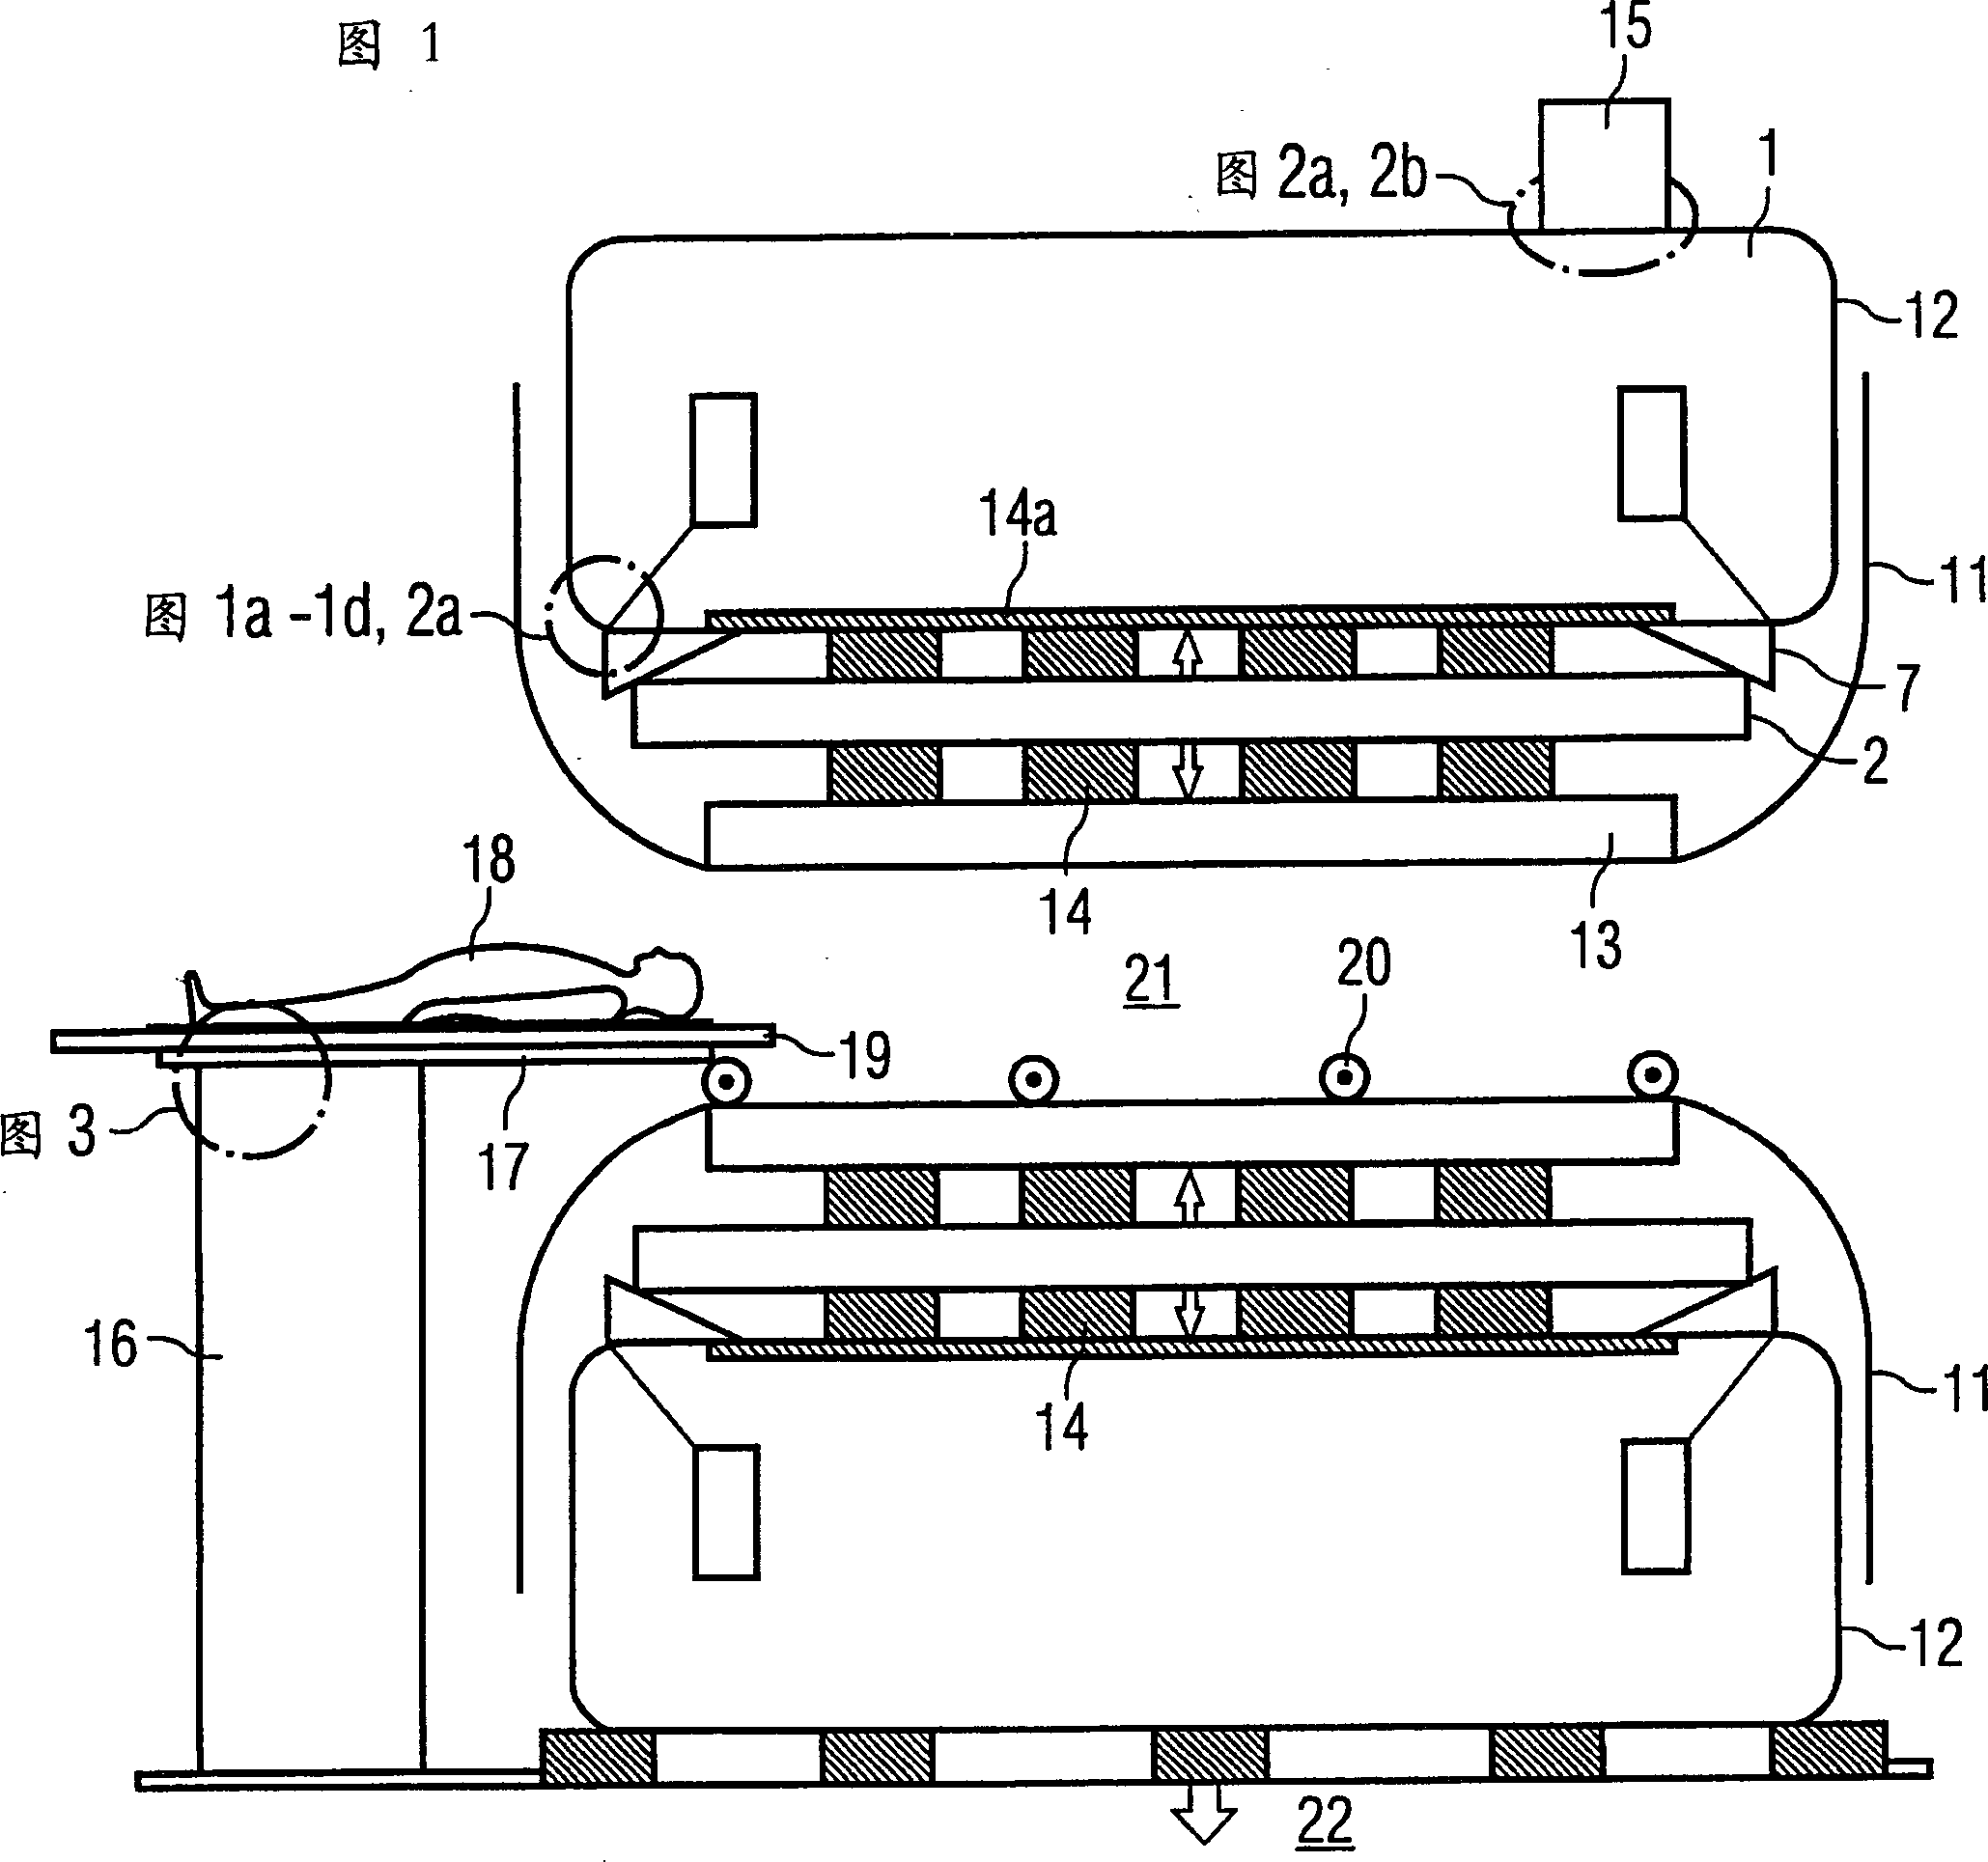 Nuclear spin laminagraphic device through mechanical vibration to reduce vibration and noise